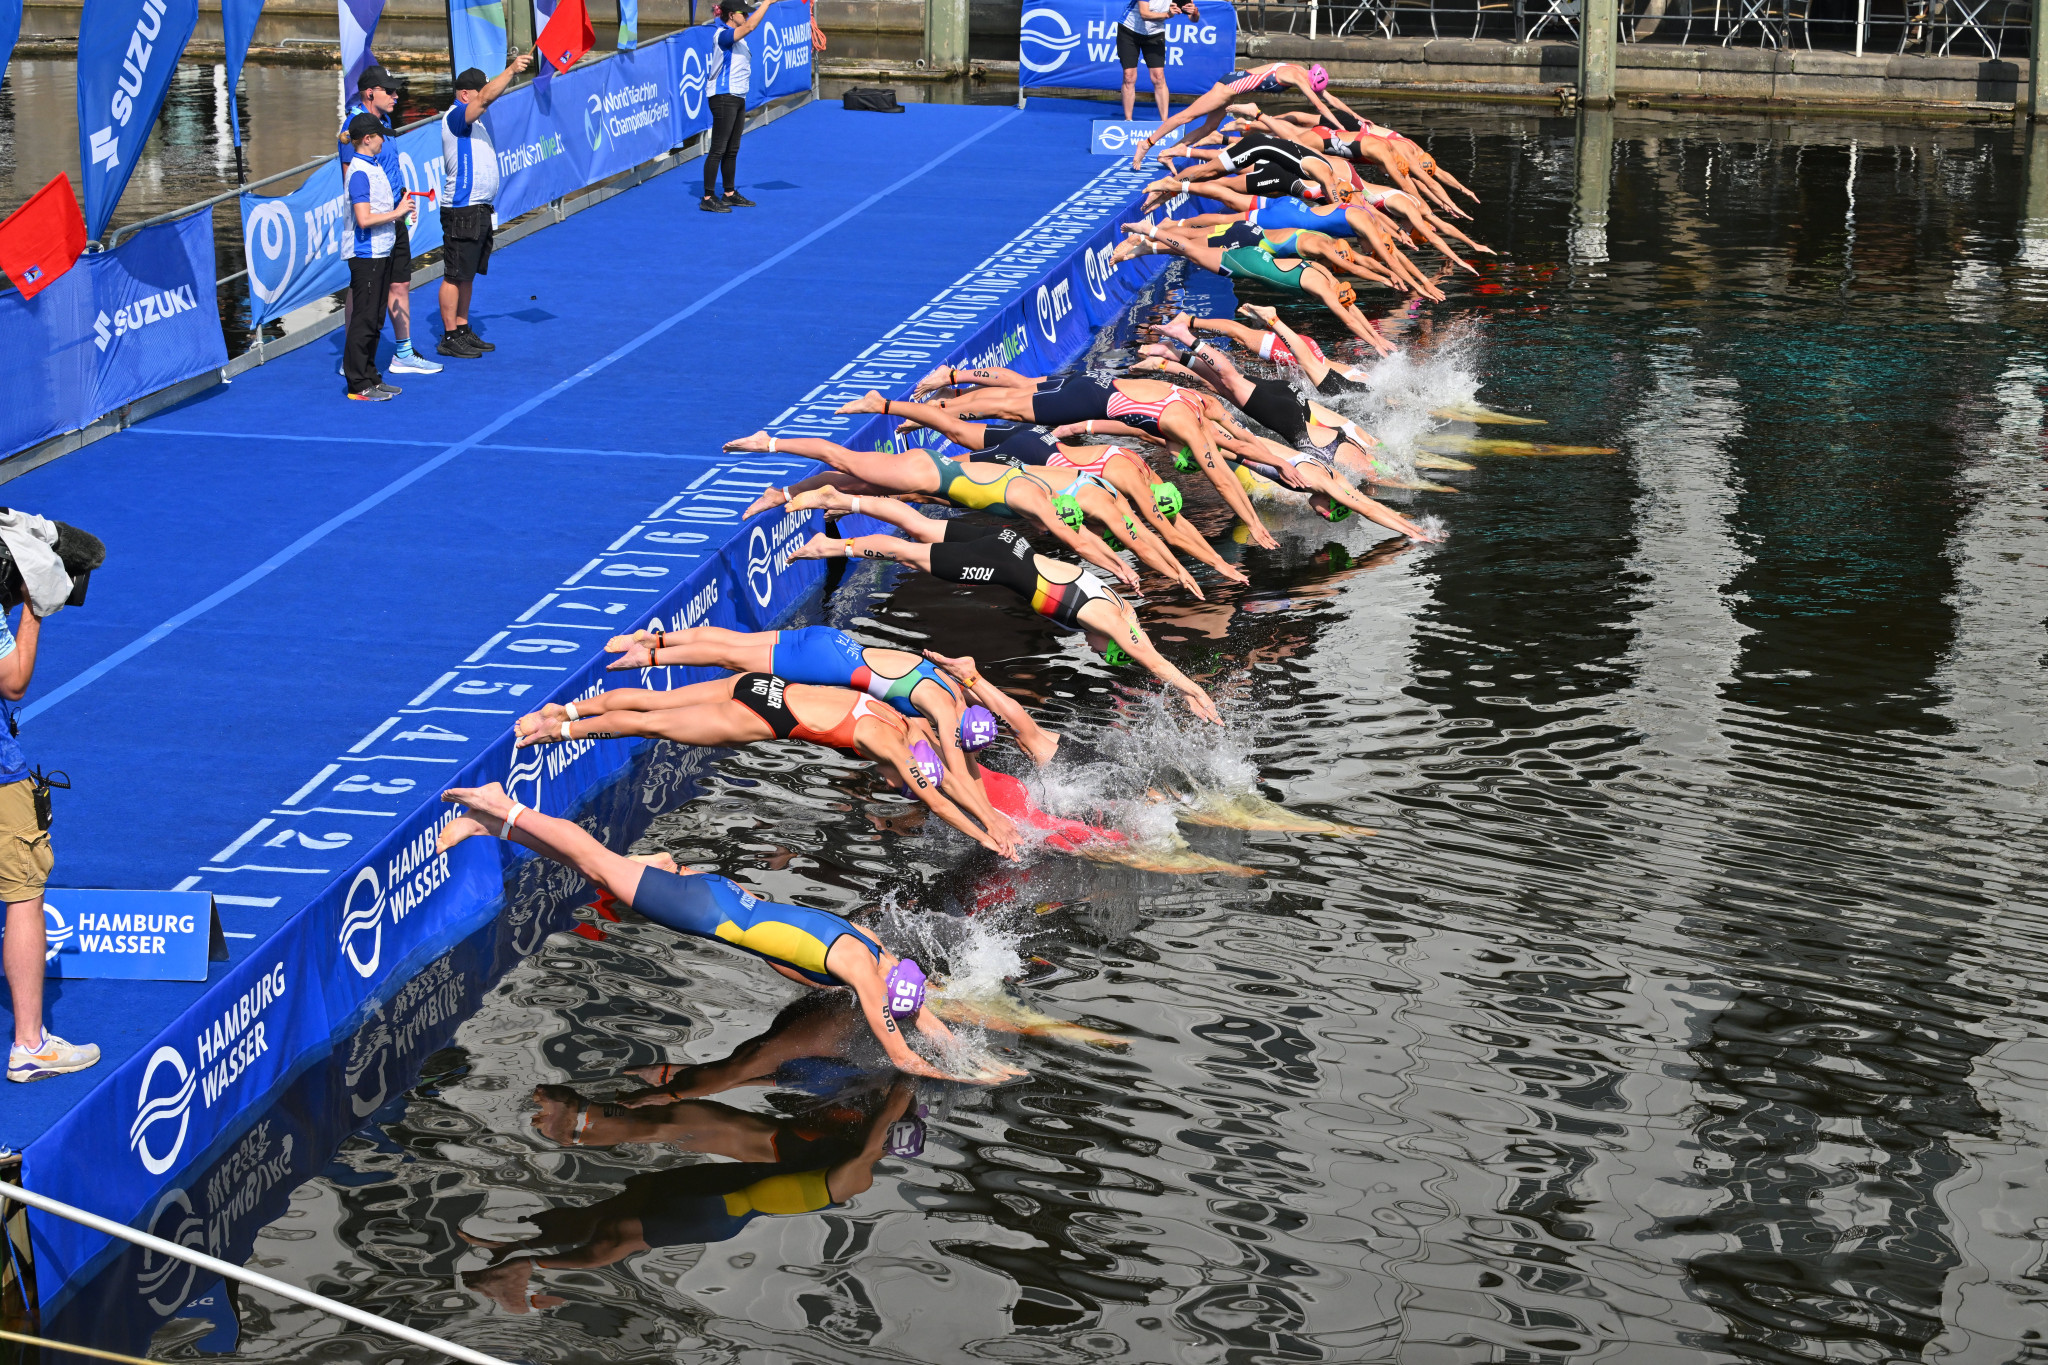 The women's qualifiers also took place with the same format of 10 athletes going through to the final from each heat before a repechage round decides the last 10 ©World Triathlon